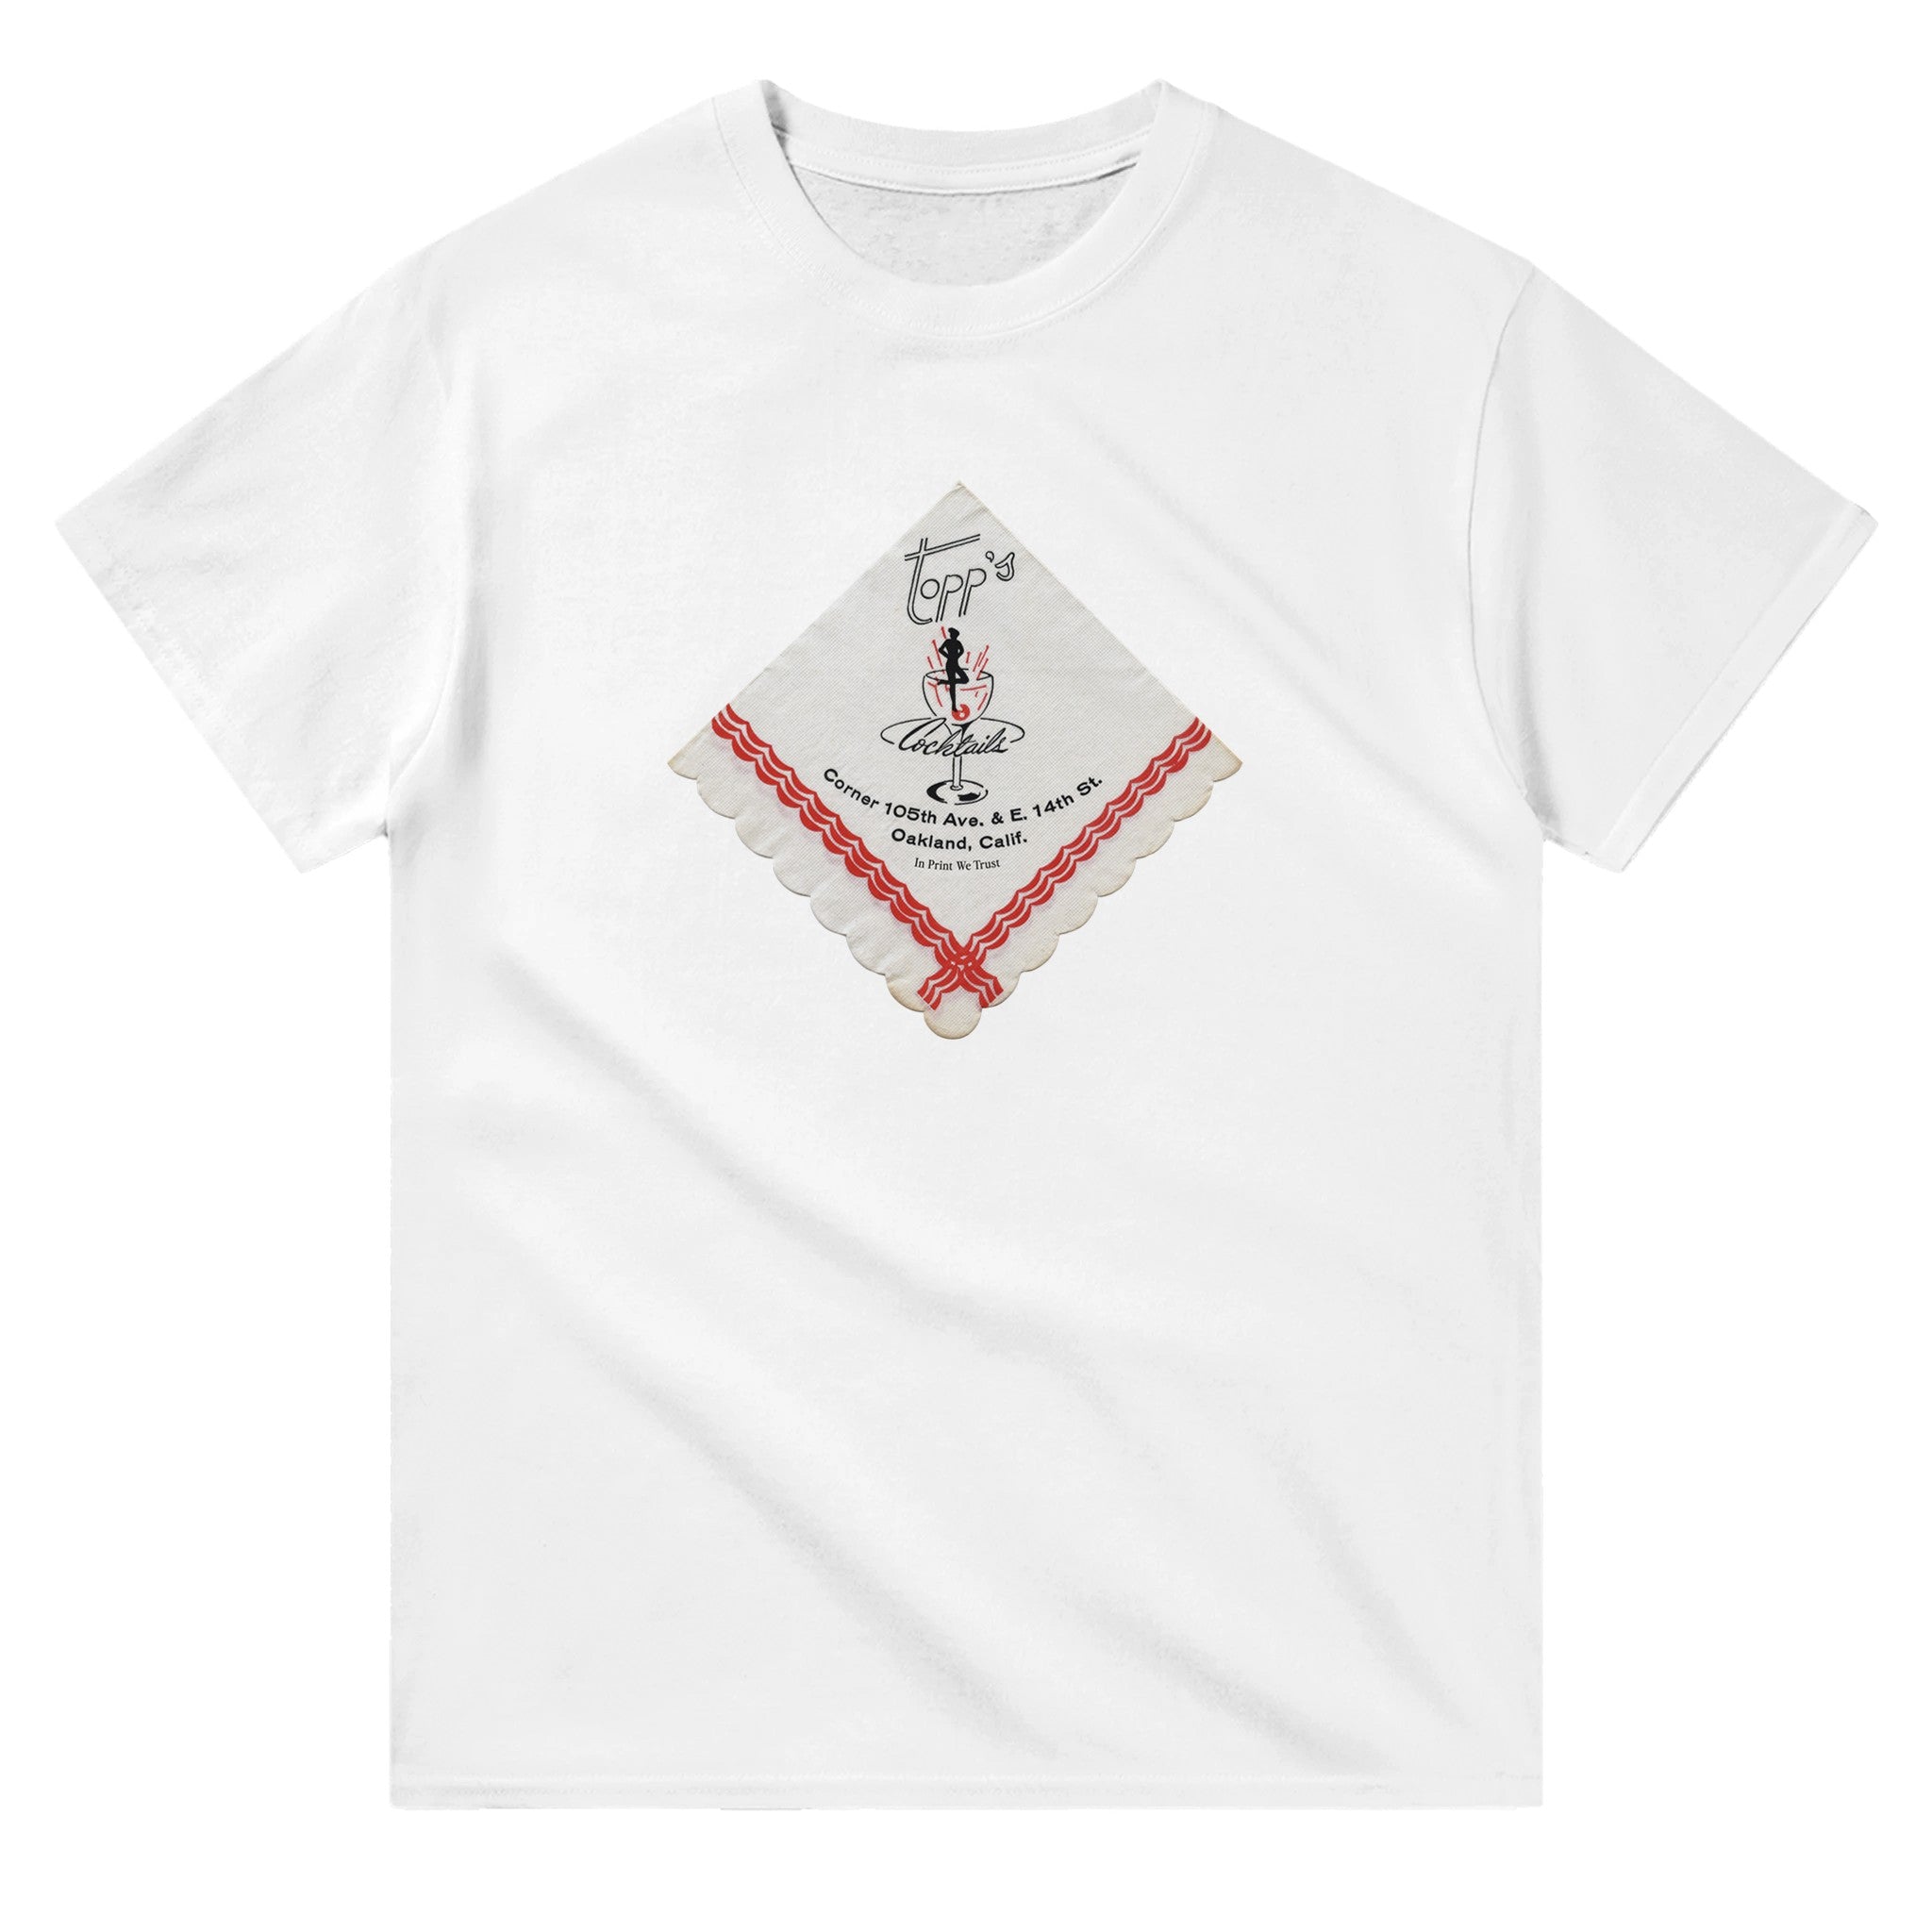 'Topp's Cocktails' classic tee - In Print We Trust